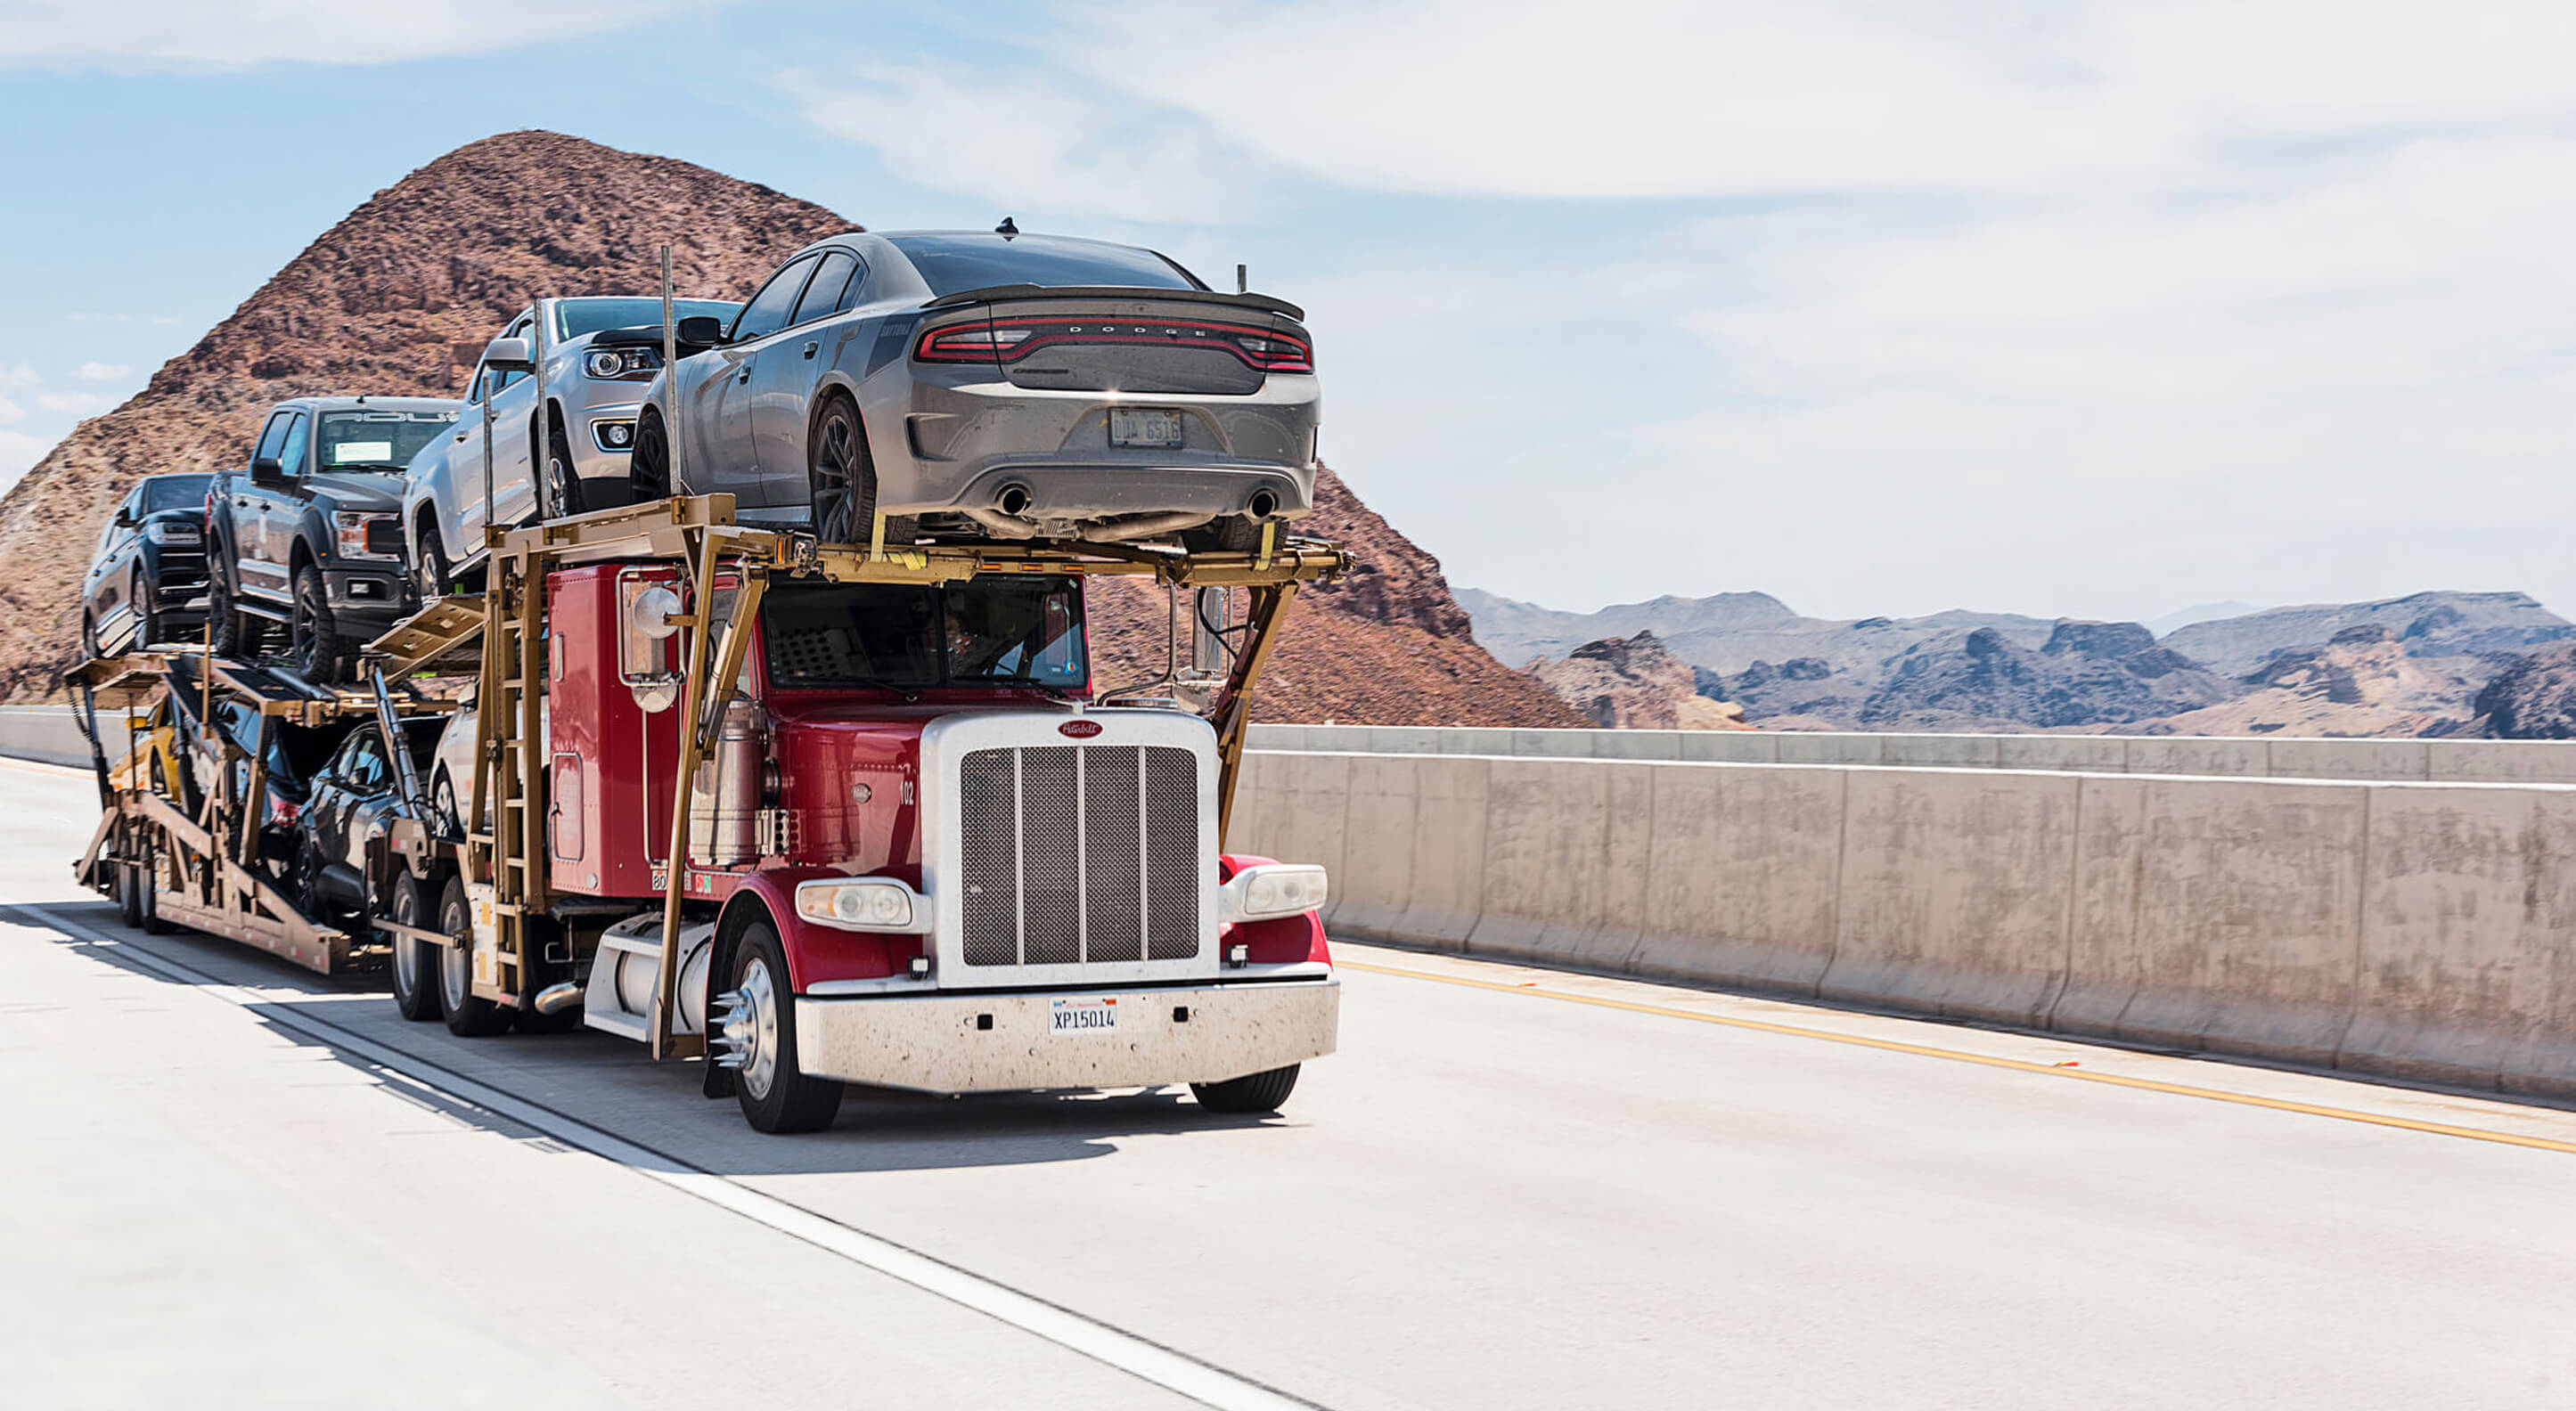 How to Start A Car Hauling Business?